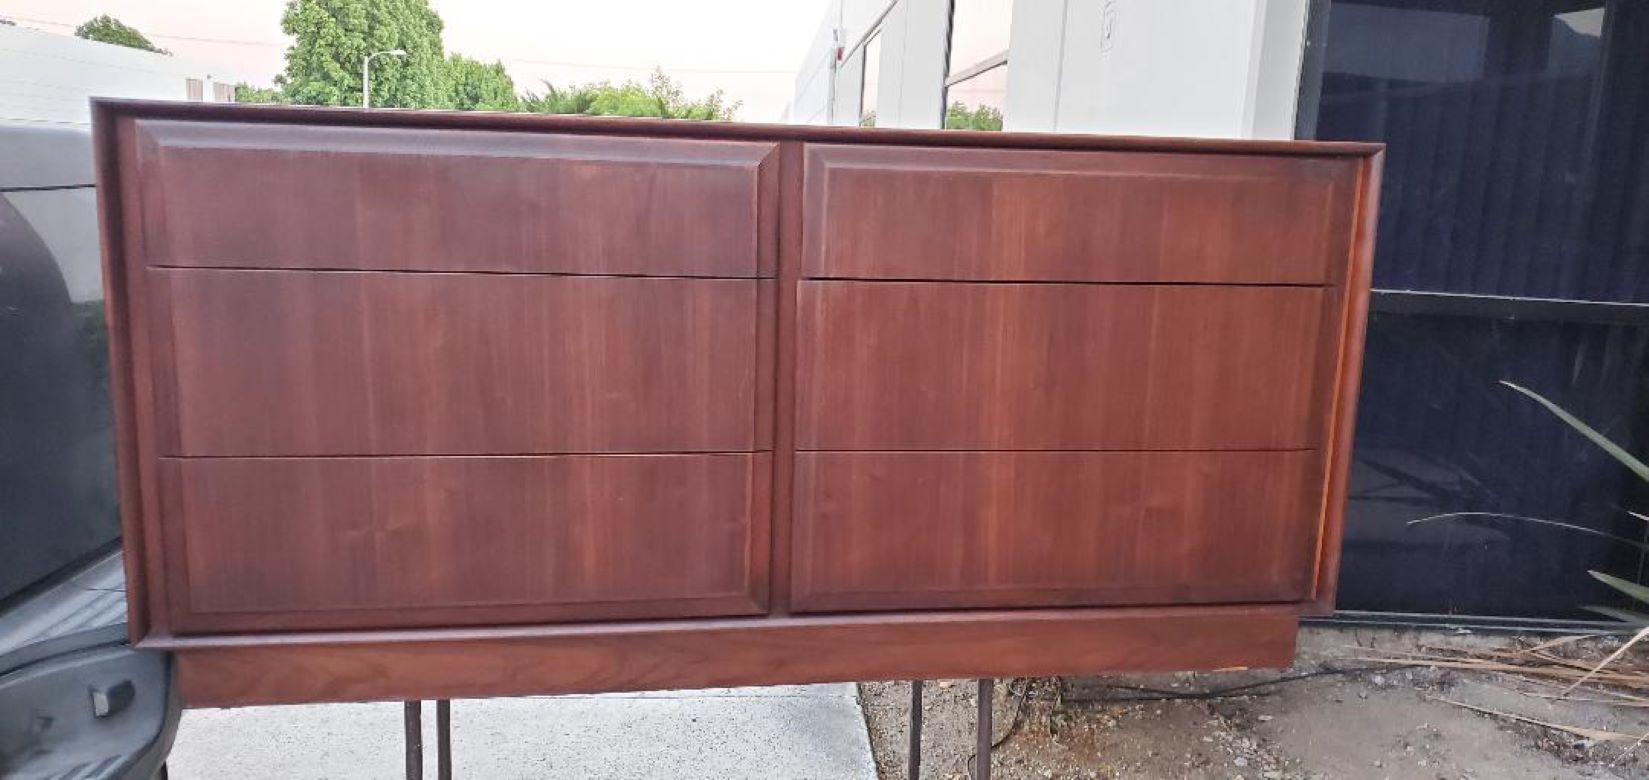 1960s vintage Dillingham walnut 6 drawer dresser attributed to Milo Baughman (Some Say Merton L Gershun Also).

Dillingham - 1960s Vintage Mid-Century Modern solid walnut 6 drawer dresser.

Construction is sturdy, and strong, with a plinth base.